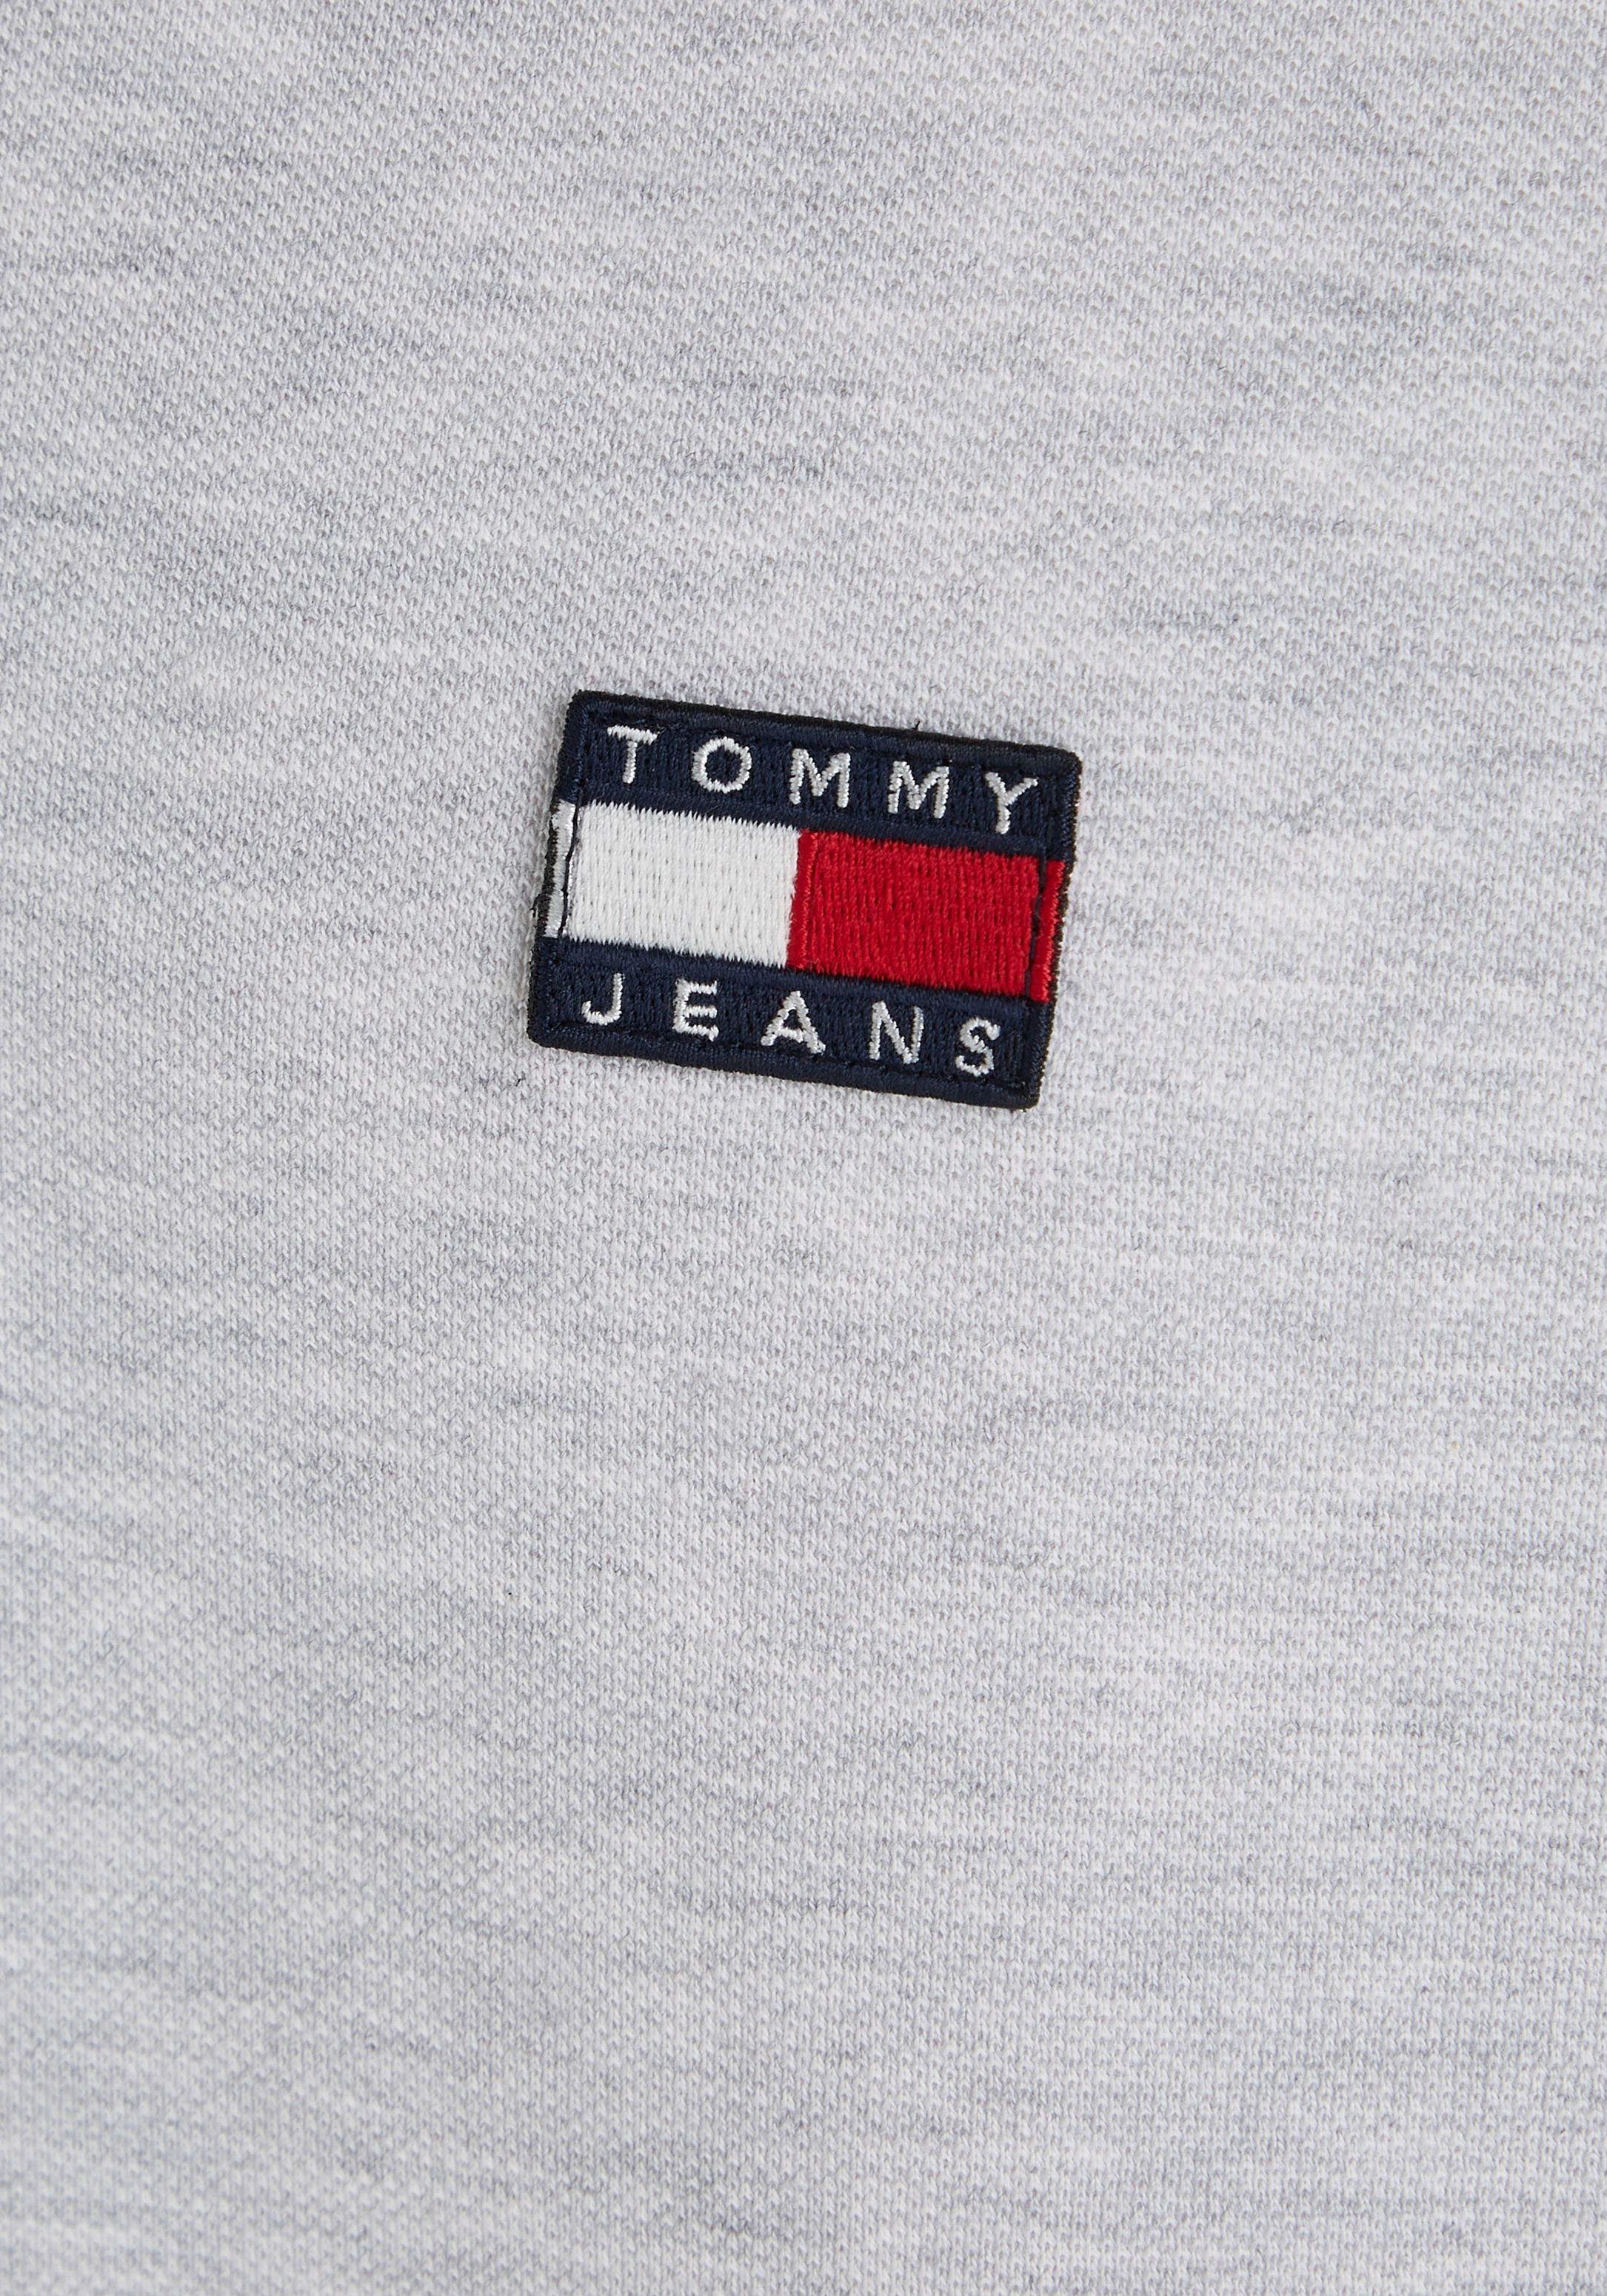 TJM DETAIL Htr CLSC Jeans Grey TIPPING Silver POLO Tommy Poloshirt